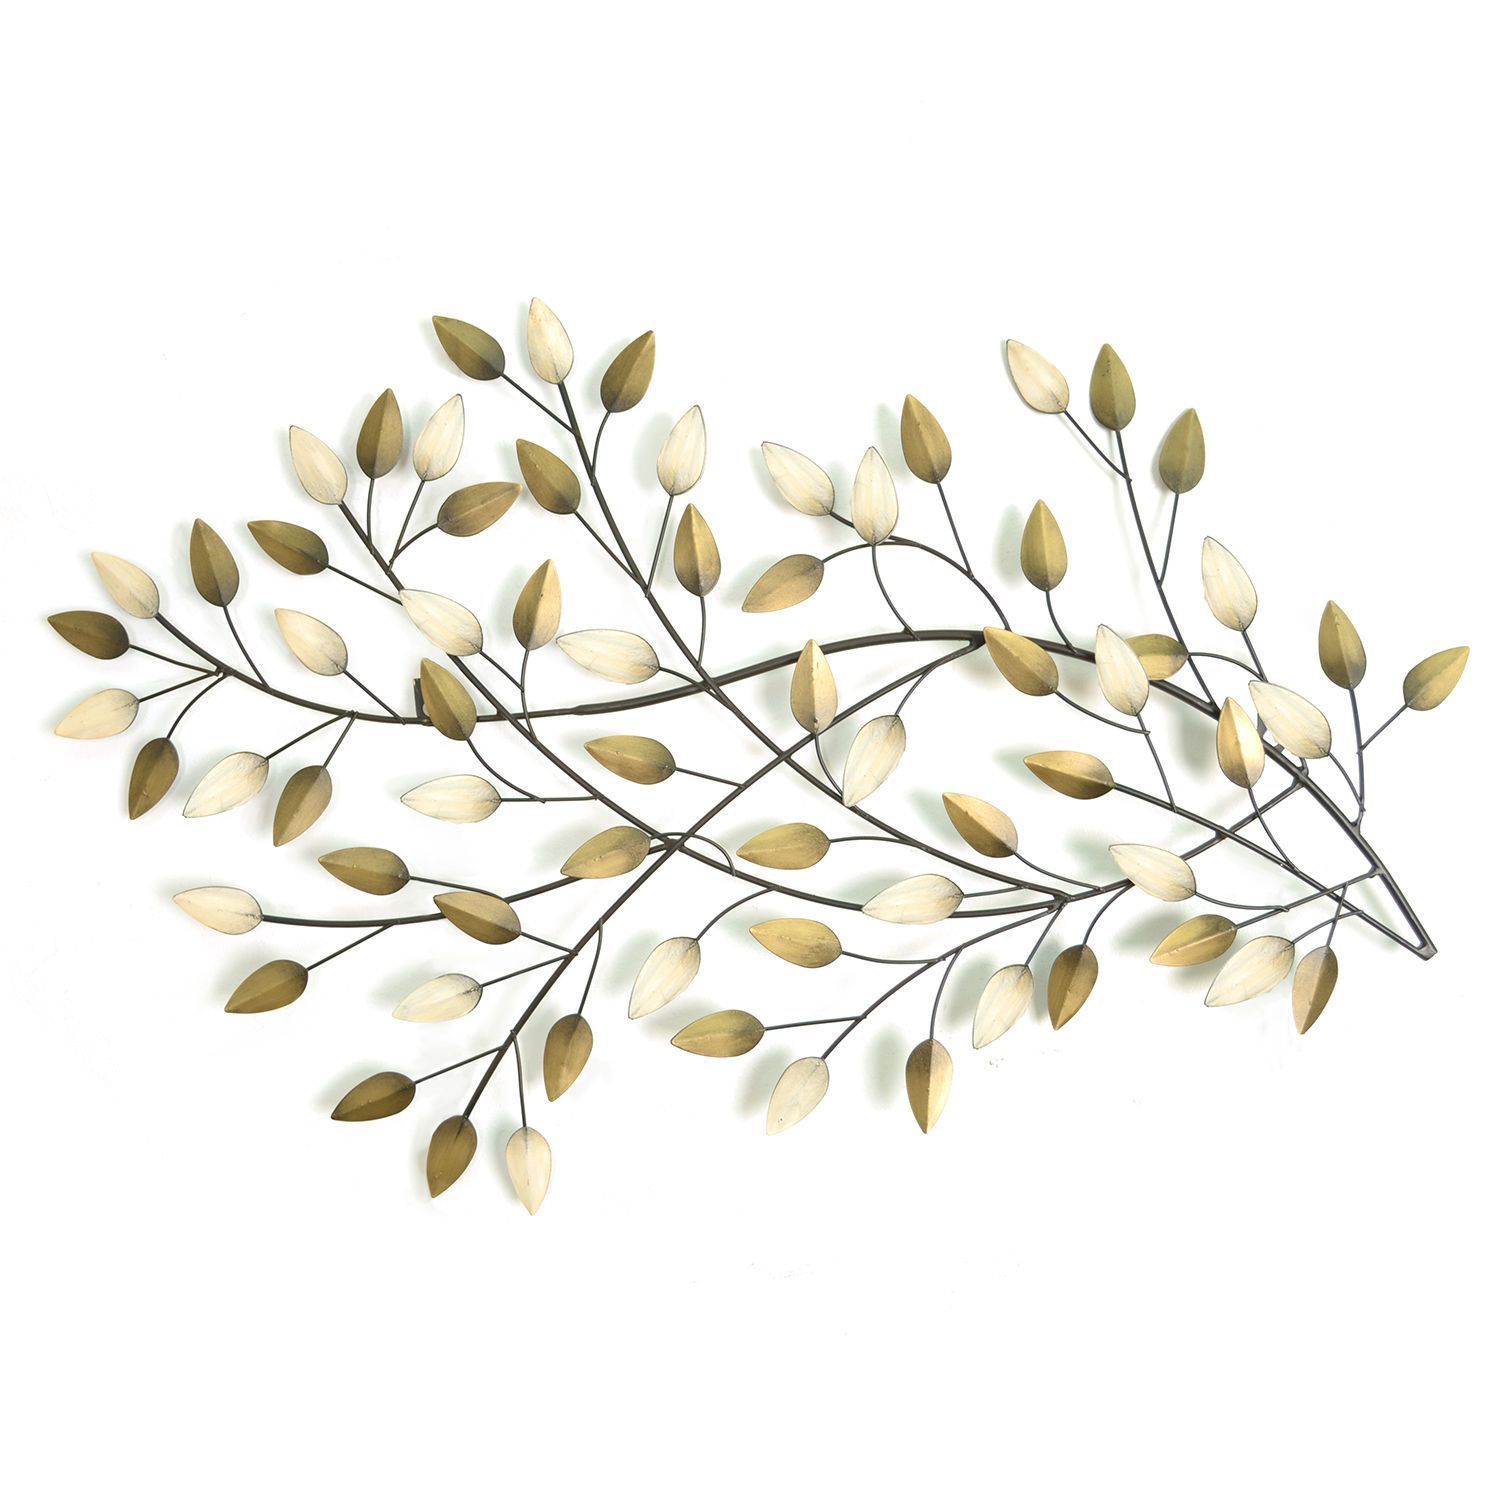 Stratton Home Blowing Leaves Wall Decor (gold/beige), Multi For Desford Leaf Wall Decor (Photo 9 of 30)